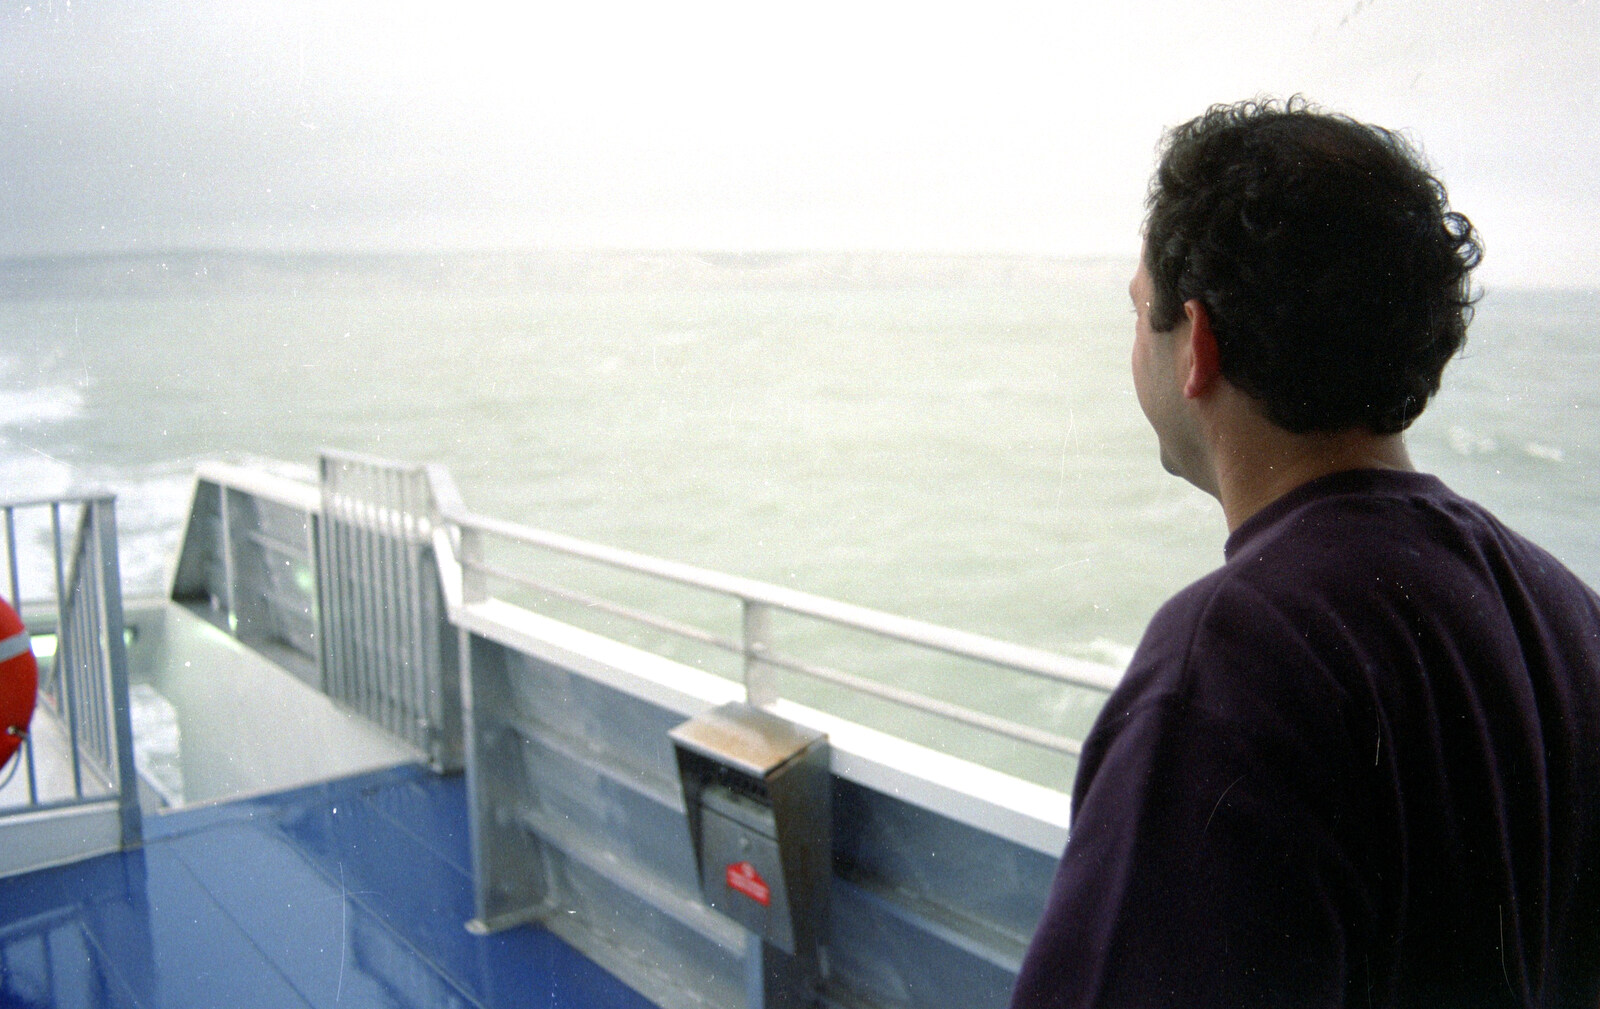 DH looks back towards Dover from The CISU Internet Team, Bedroom Building and Ferries, Suffolk - 16th February 1996